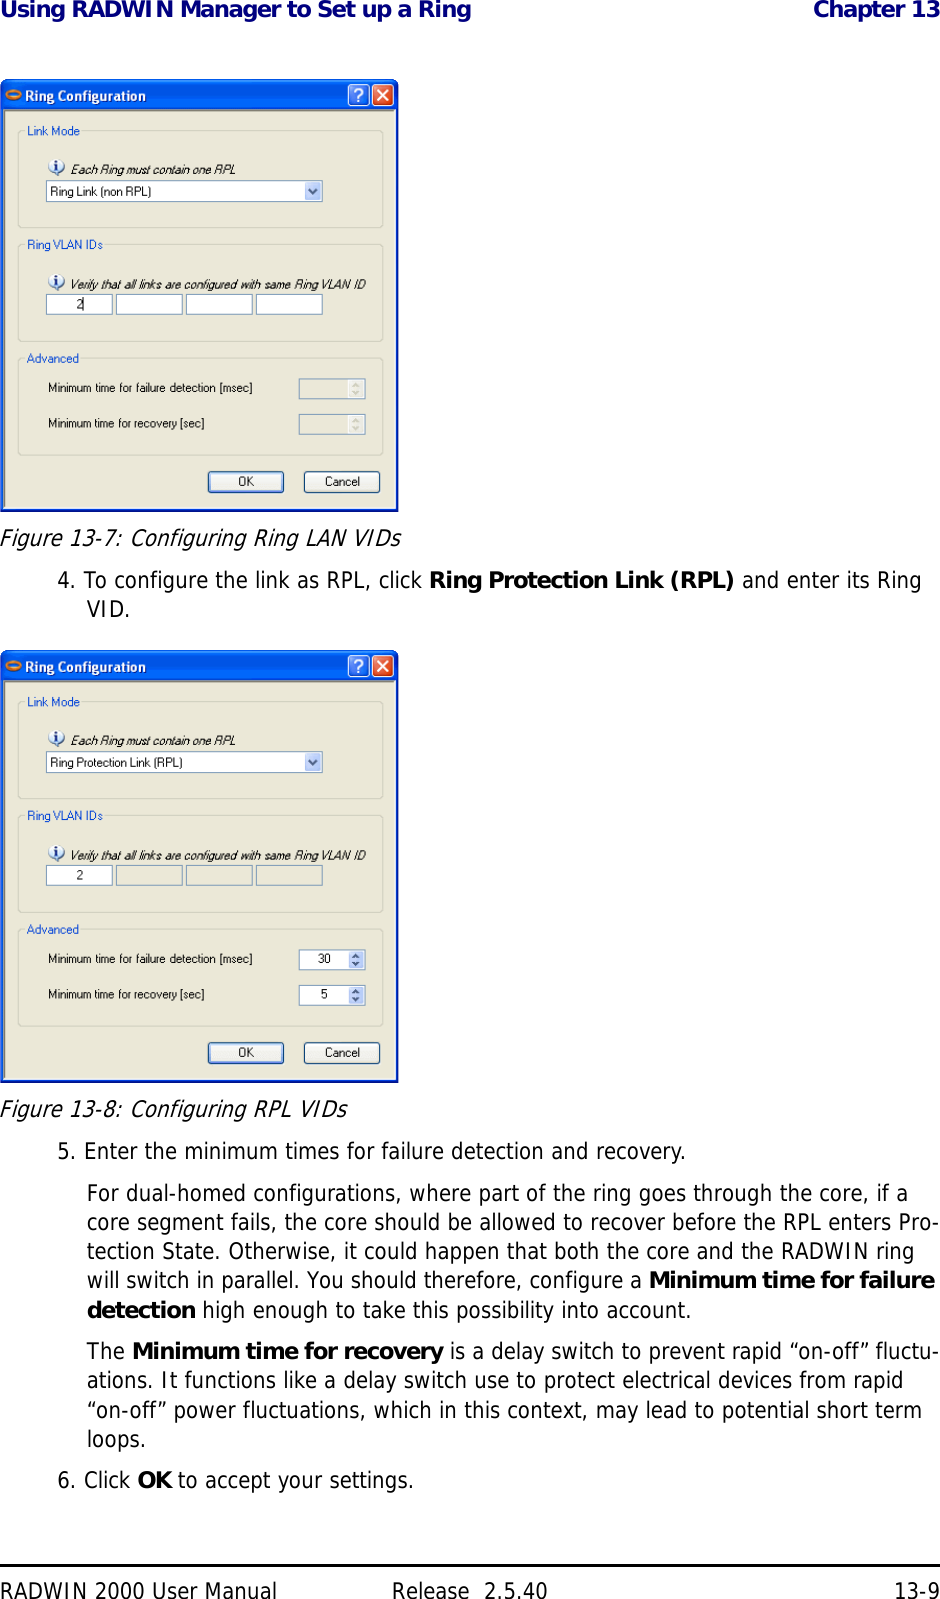 Using RADWIN Manager to Set up a Ring Chapter 13RADWIN 2000 User Manual Release  2.5.40 13-9Figure 13-7: Configuring Ring LAN VIDs4. To configure the link as RPL, click Ring Protection Link (RPL) and enter its Ring VID.Figure 13-8: Configuring RPL VIDs5. Enter the minimum times for failure detection and recovery.For dual-homed configurations, where part of the ring goes through the core, if a core segment fails, the core should be allowed to recover before the RPL enters Pro-tection State. Otherwise, it could happen that both the core and the RADWIN ring will switch in parallel. You should therefore, configure a Minimum time for failure detection high enough to take this possibility into account.The Minimum time for recovery is a delay switch to prevent rapid “on-off” fluctu-ations. It functions like a delay switch use to protect electrical devices from rapid “on-off” power fluctuations, which in this context, may lead to potential short term loops.6. Click OK to accept your settings.